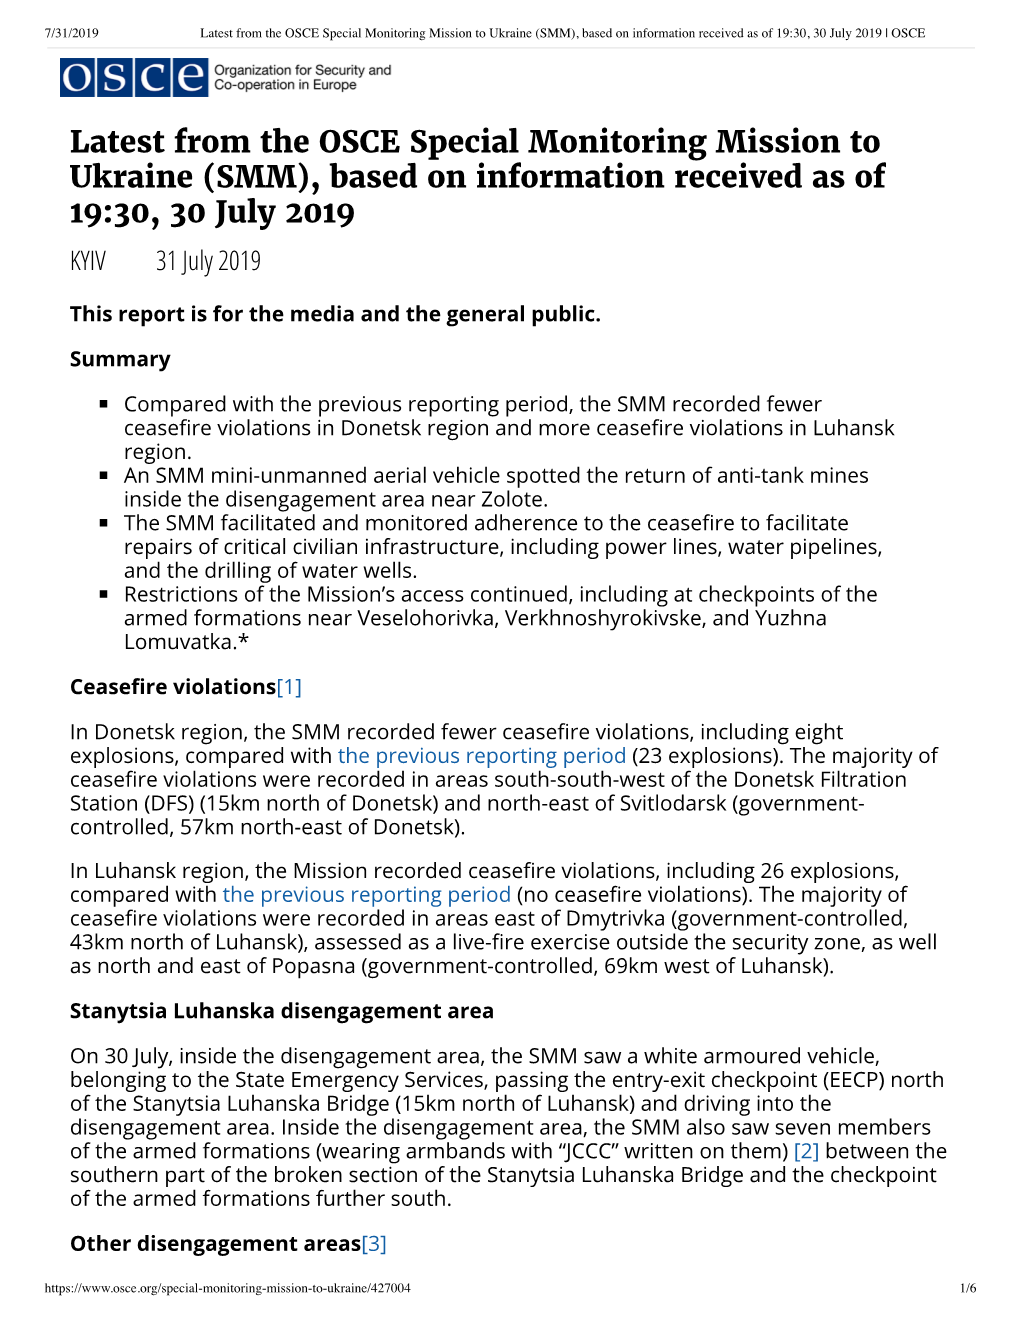 Latest from the OSCE Special Monitoring Mission to Ukraine (SMM), Based on Information Received As of 19:30, 30 July 2019 | OSCE